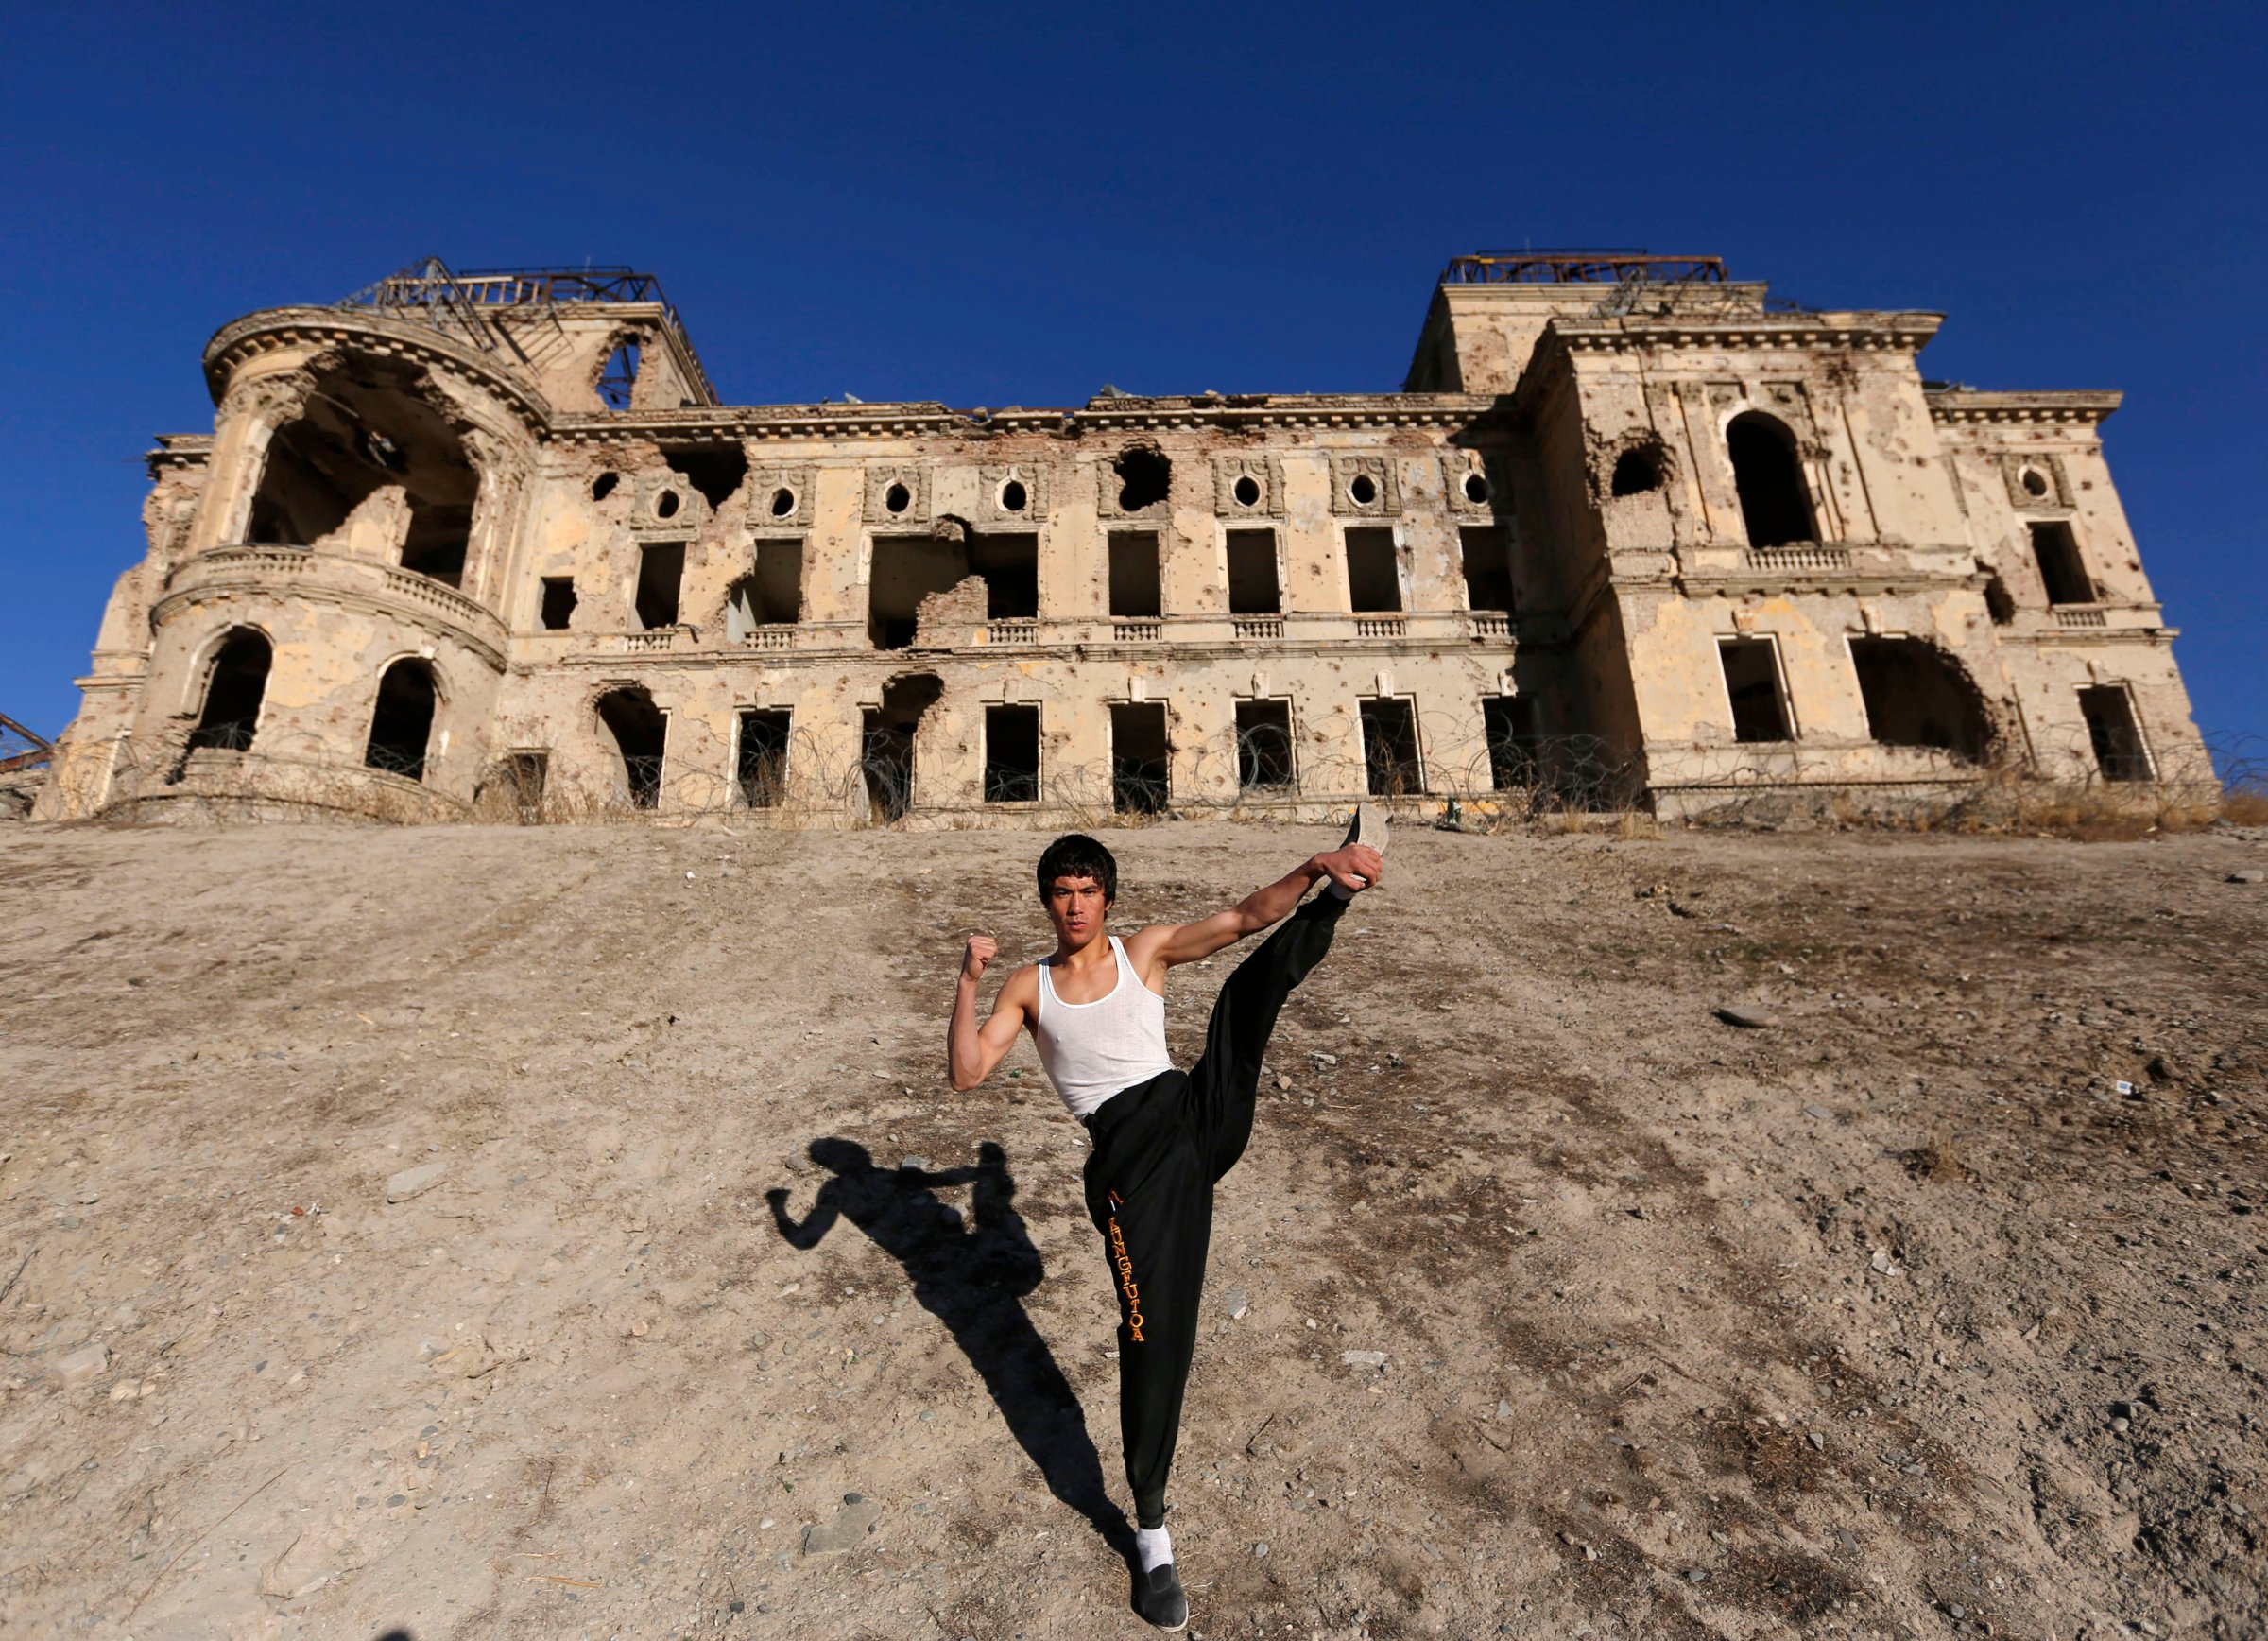 Abbas Alizada, who calls himself the Afghan Bruce Lee, poses for the media in front of the destroyed Darul Aman Palace in Kabul